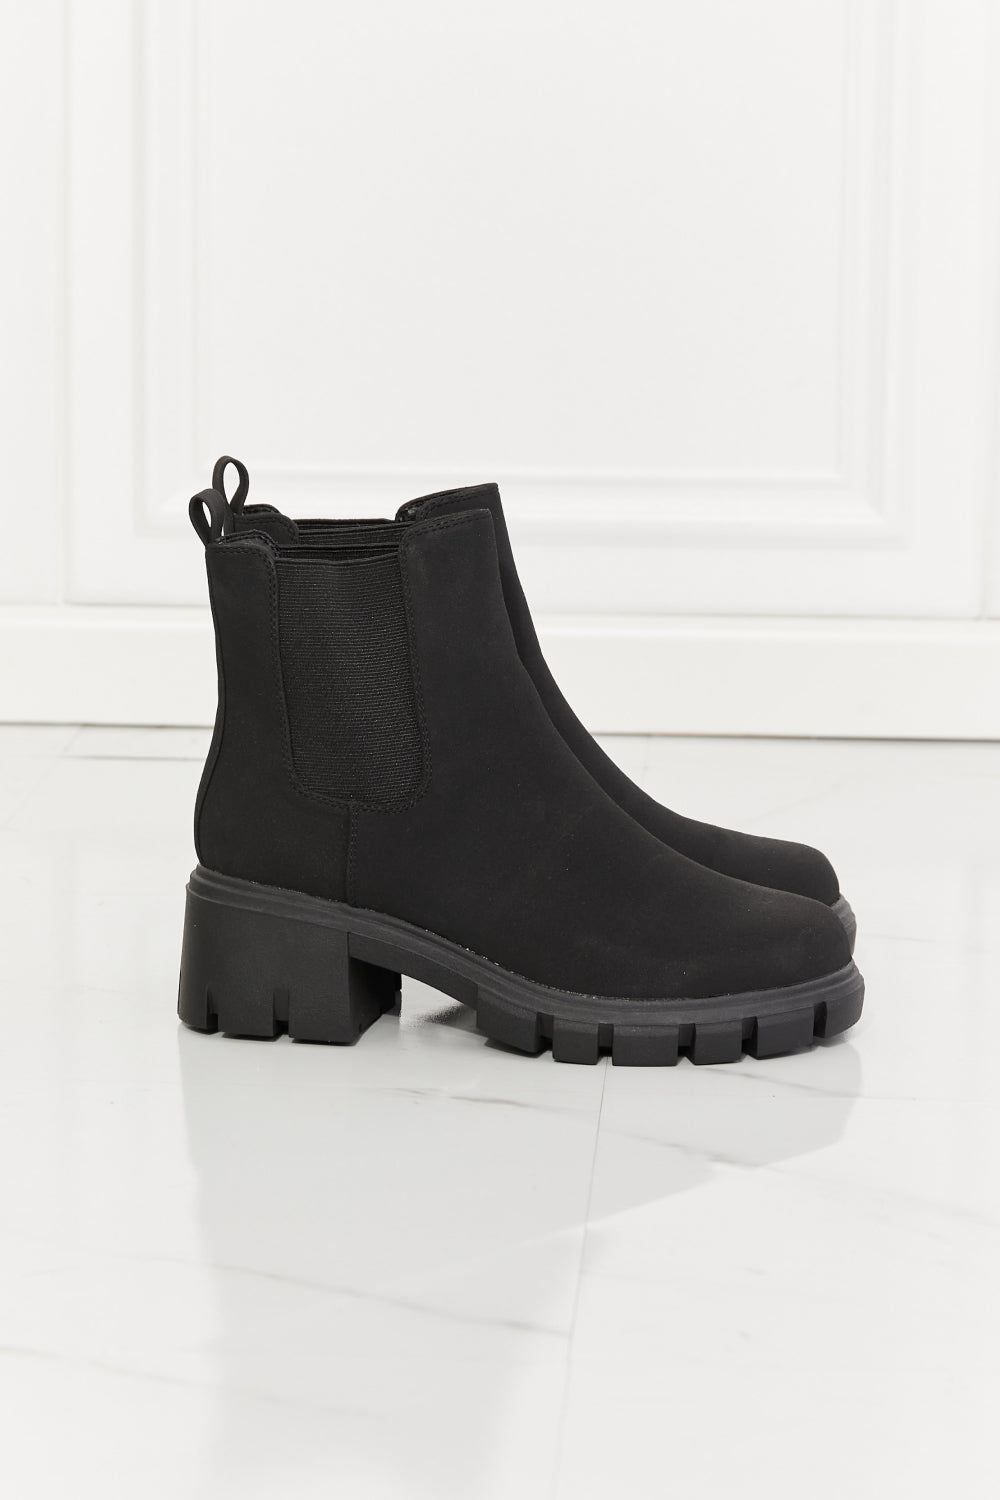 Work For It - Matte Lug Sole Chelsea Boots in Black